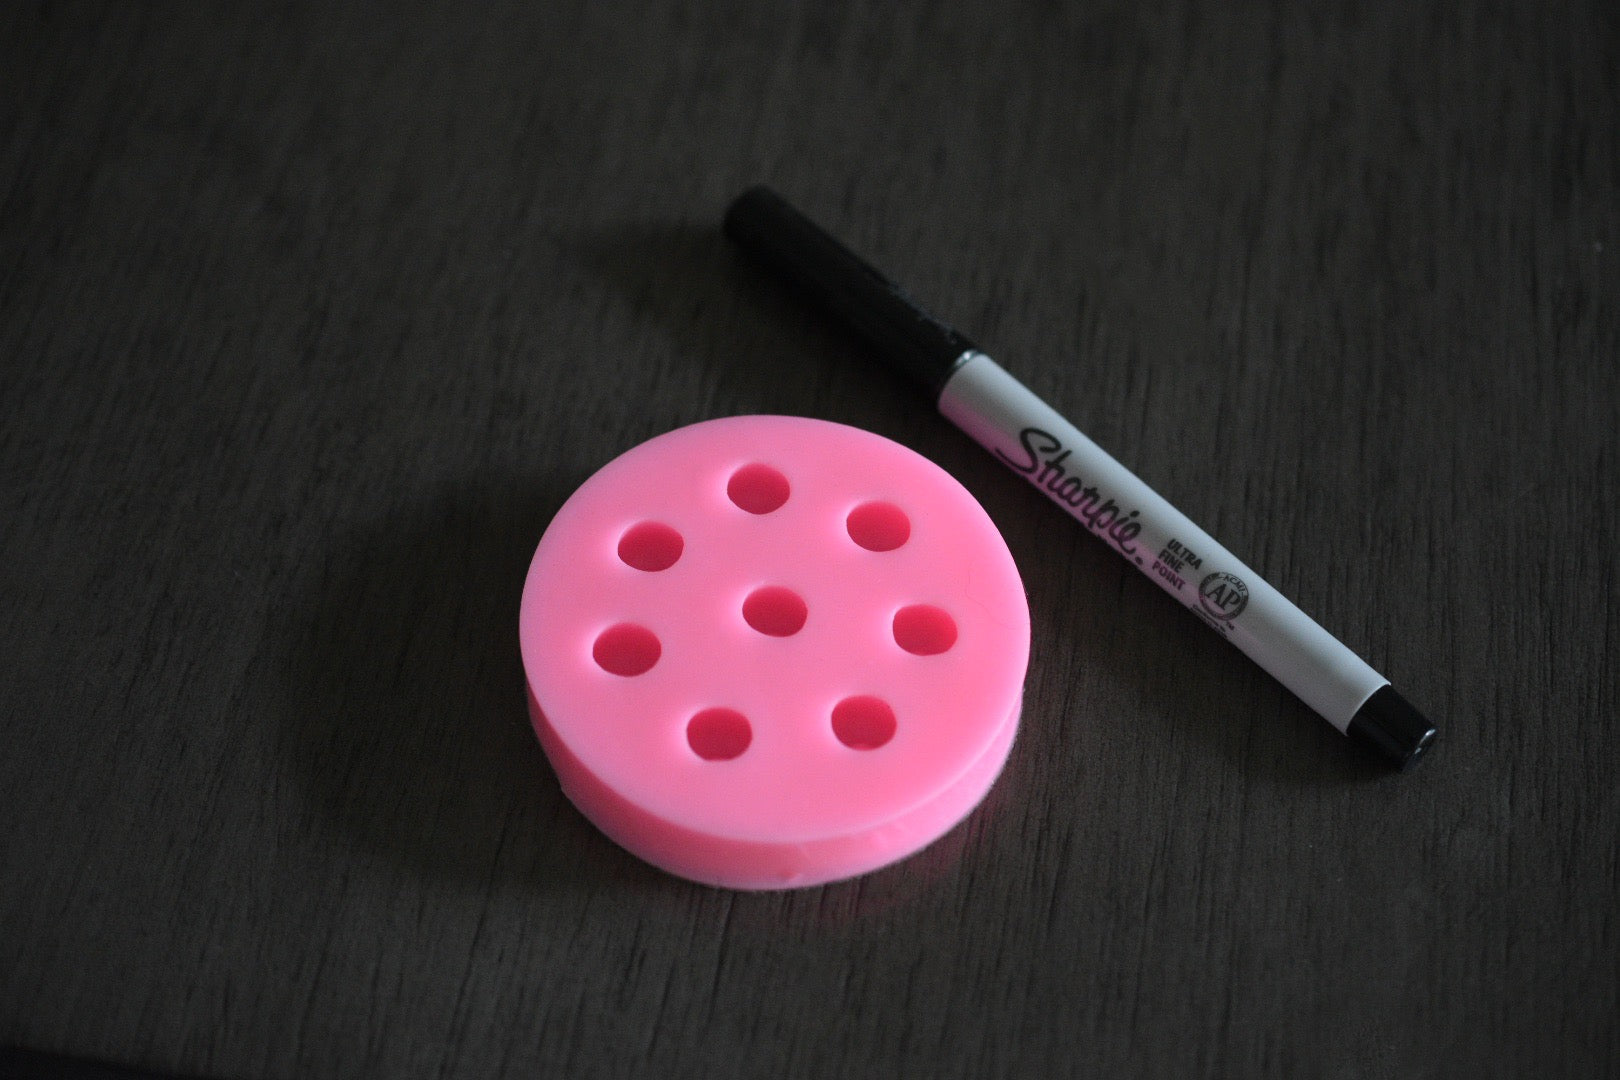 A top view of the blueberry mold on a wooden surface. A sharpie pen is next to it for size comparison. The sharpie pen is moderately longer than the mold. The mold is pink.